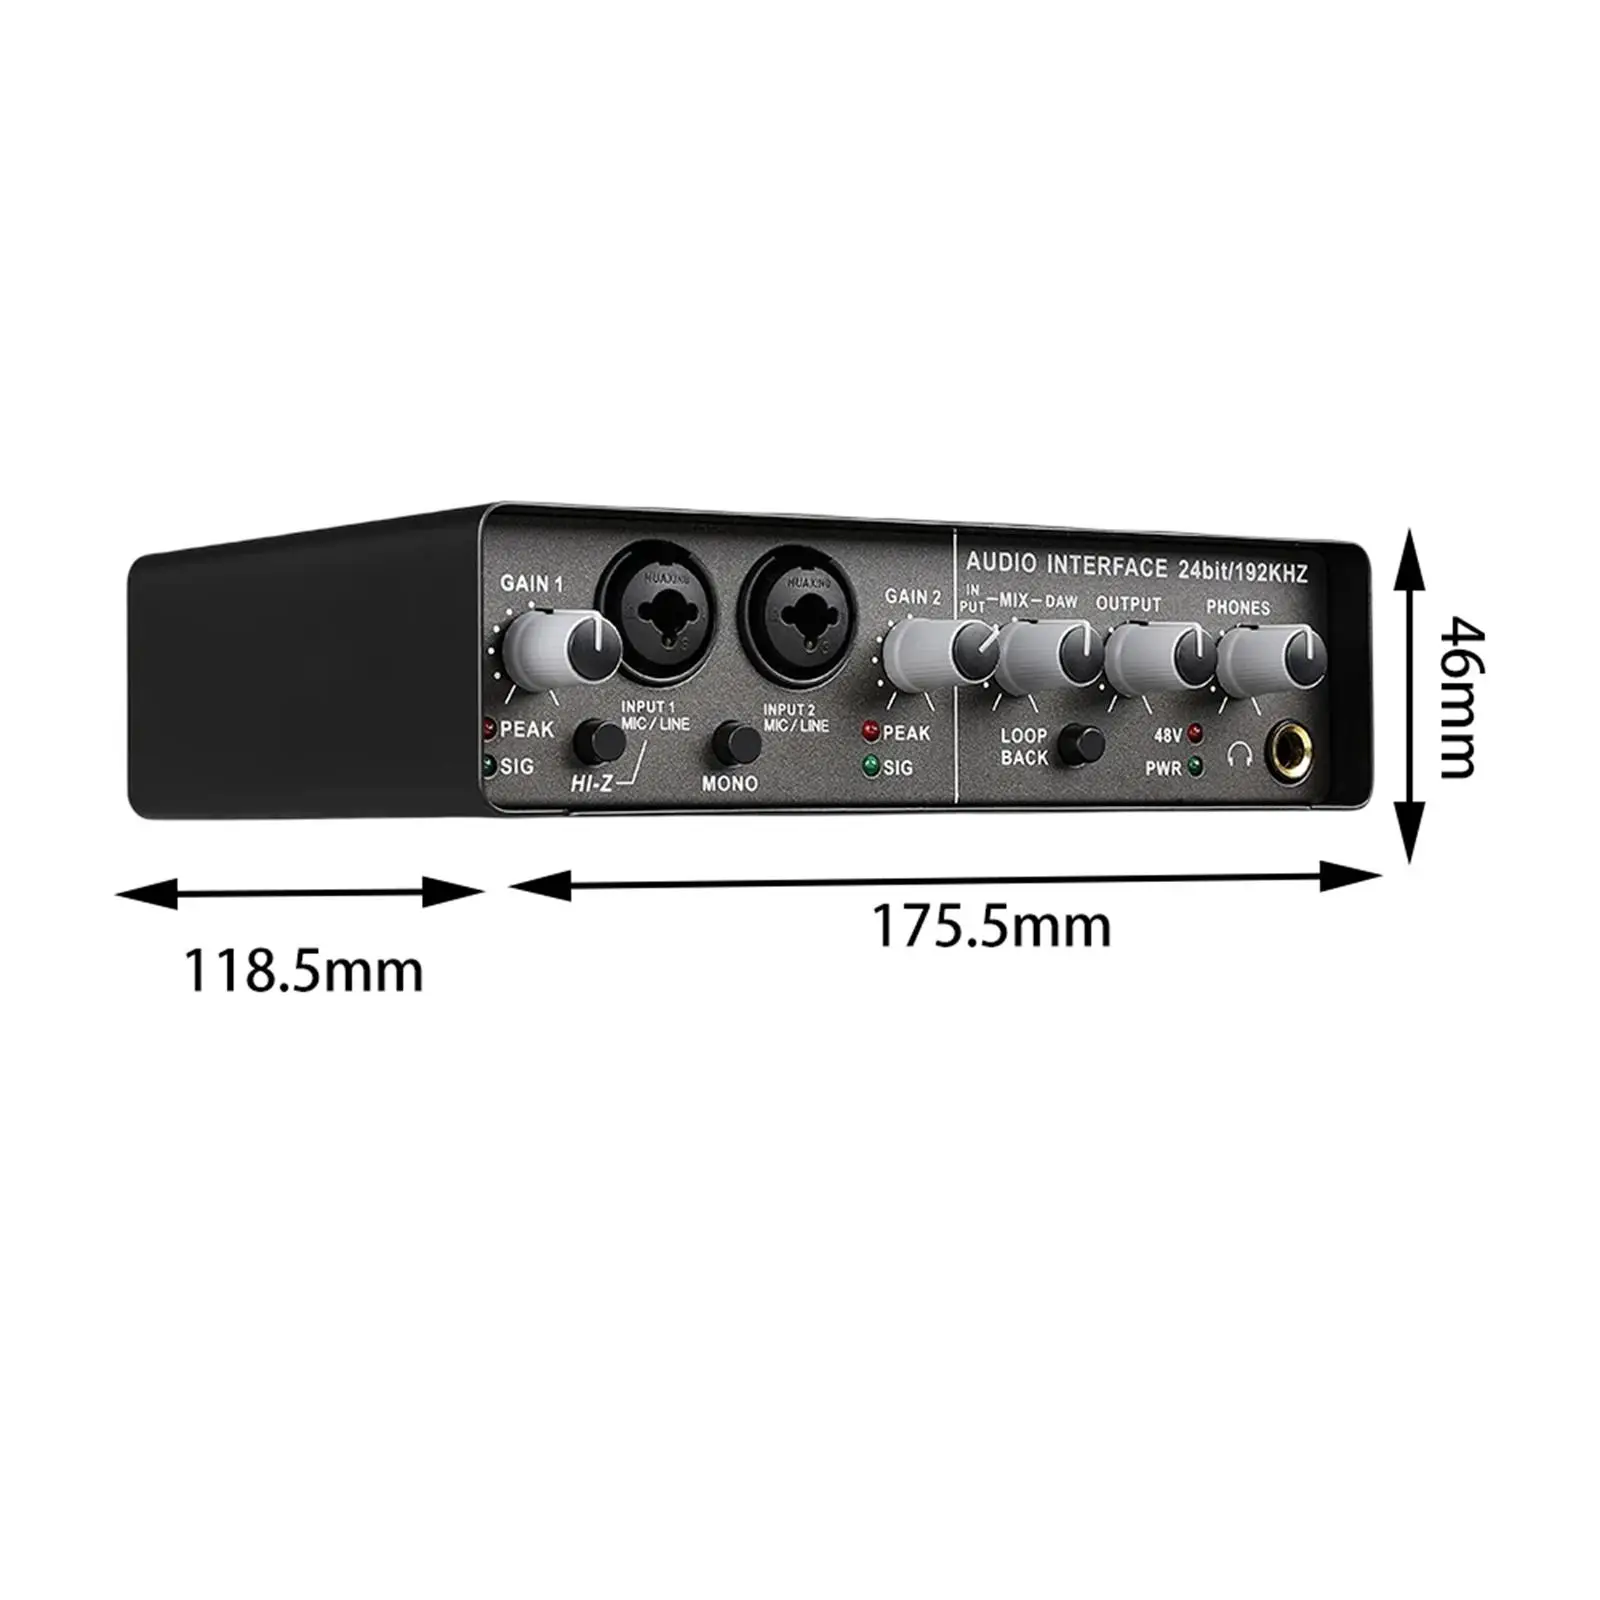 Portable USB Audio Interface Direct Monitoring High Fidelity 192KHz Audio Interface for Guitarist Podcasting Podcaster Gaming